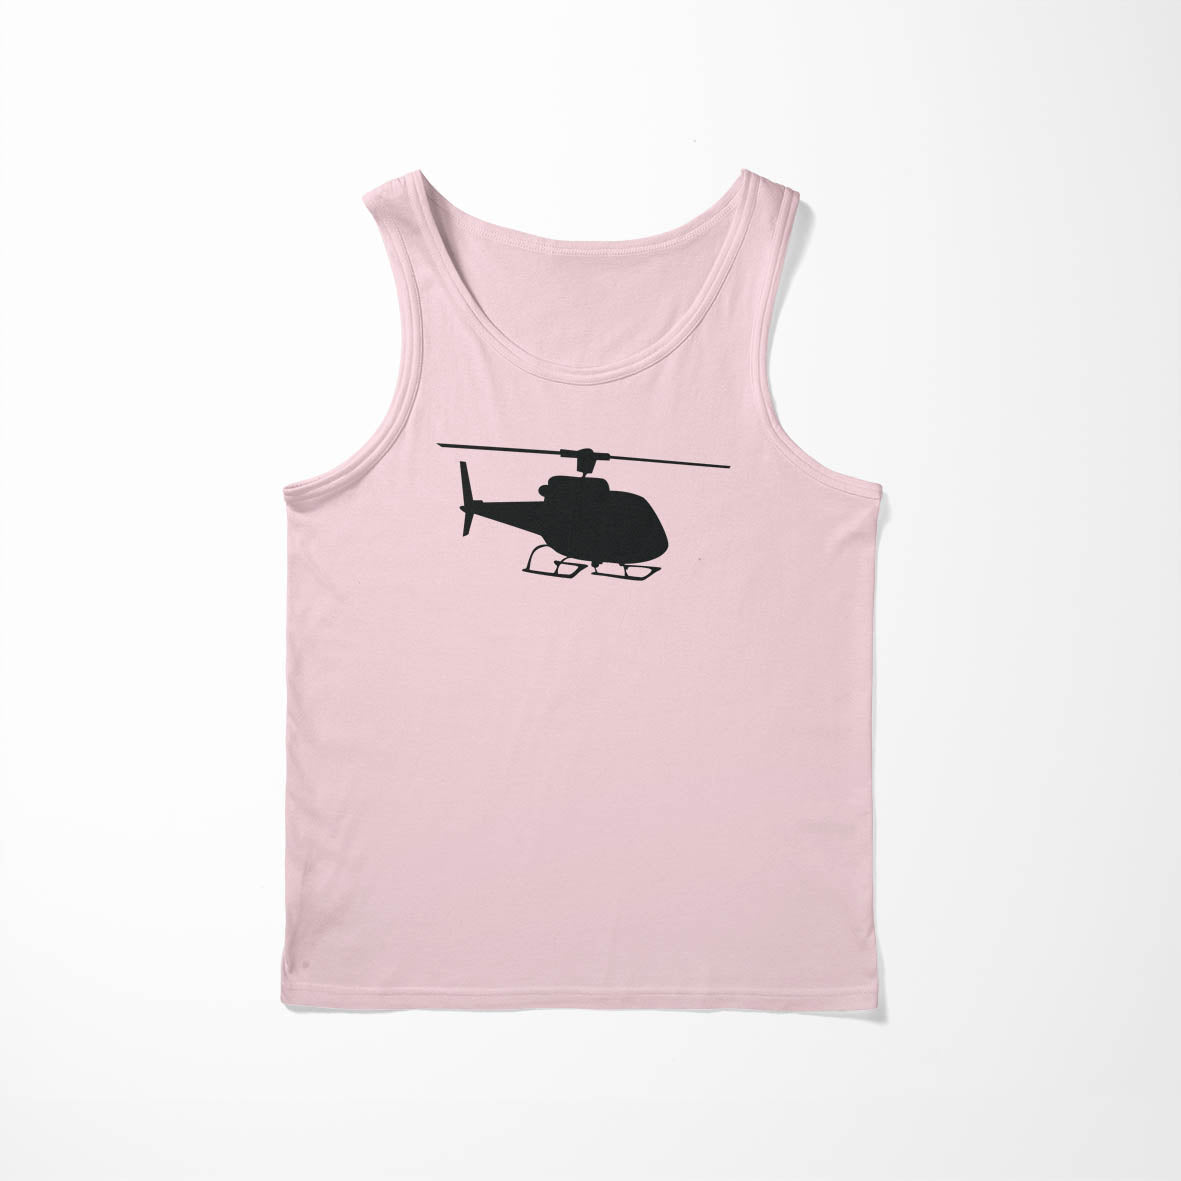 Helicopter Silhouette Designed Tank Tops